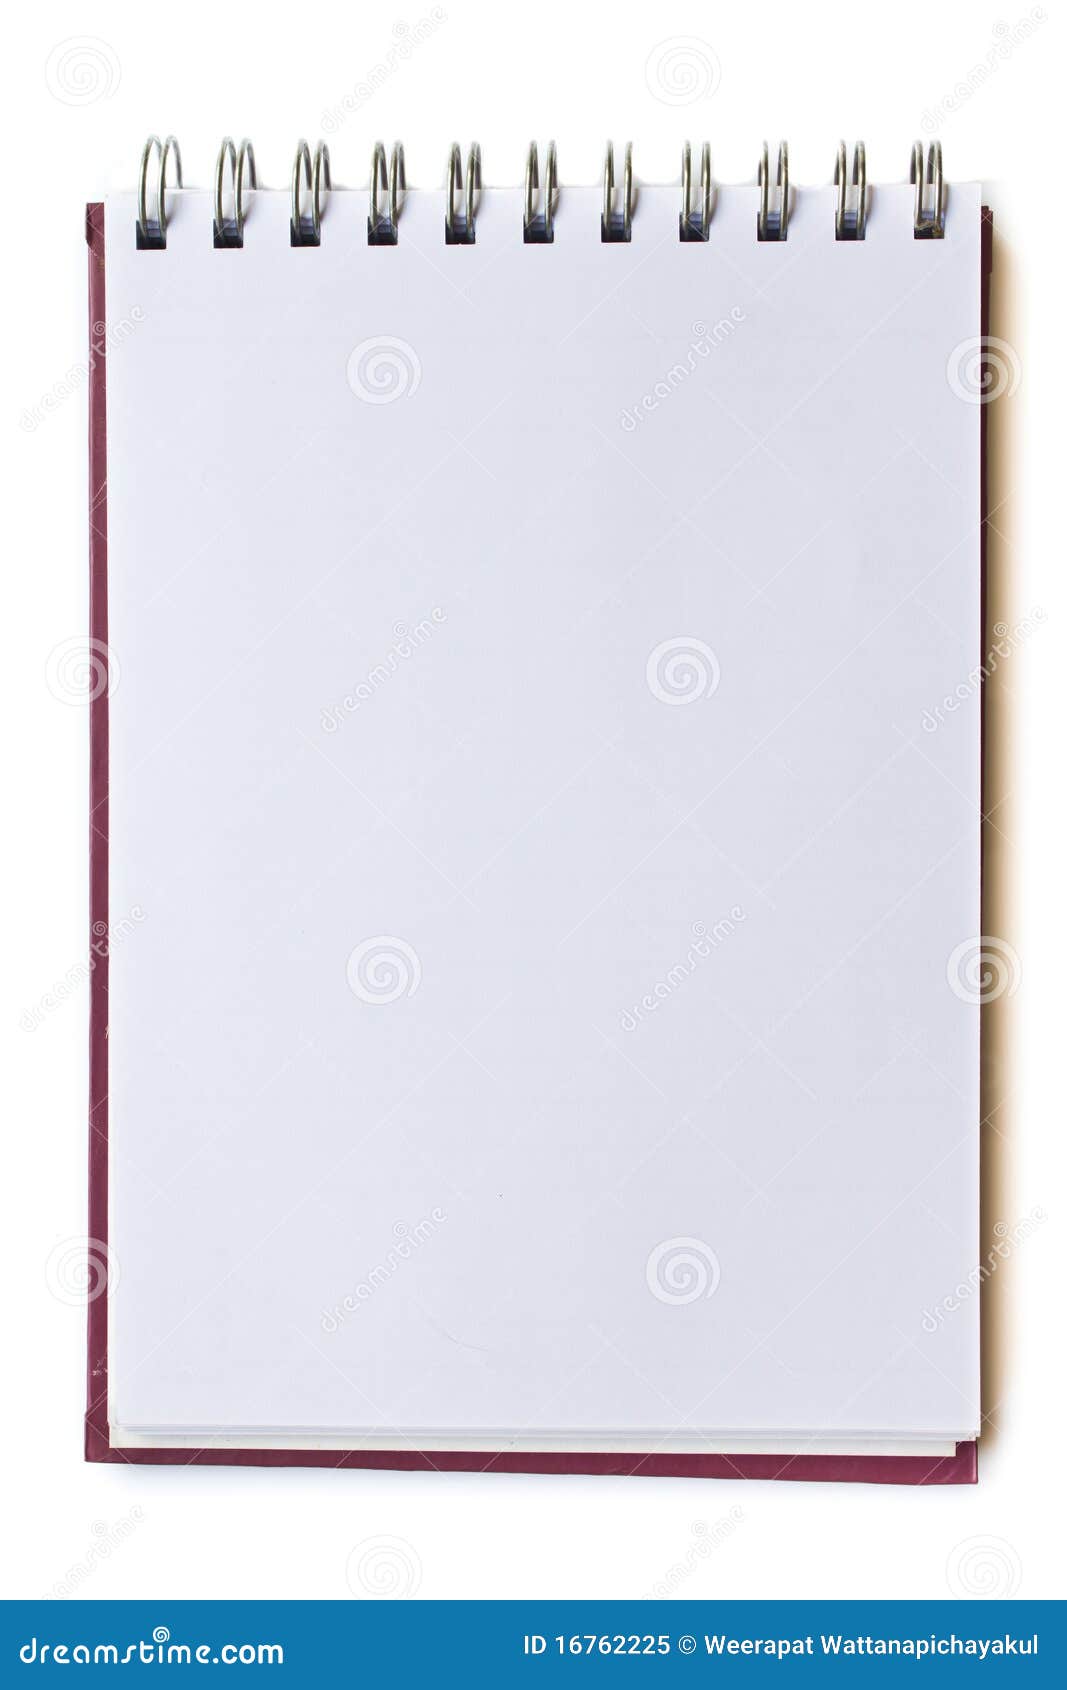 Fullsize Sublimation Plain Leather Papers Business Leather Printing Notebook  Blank A4 A5 A6